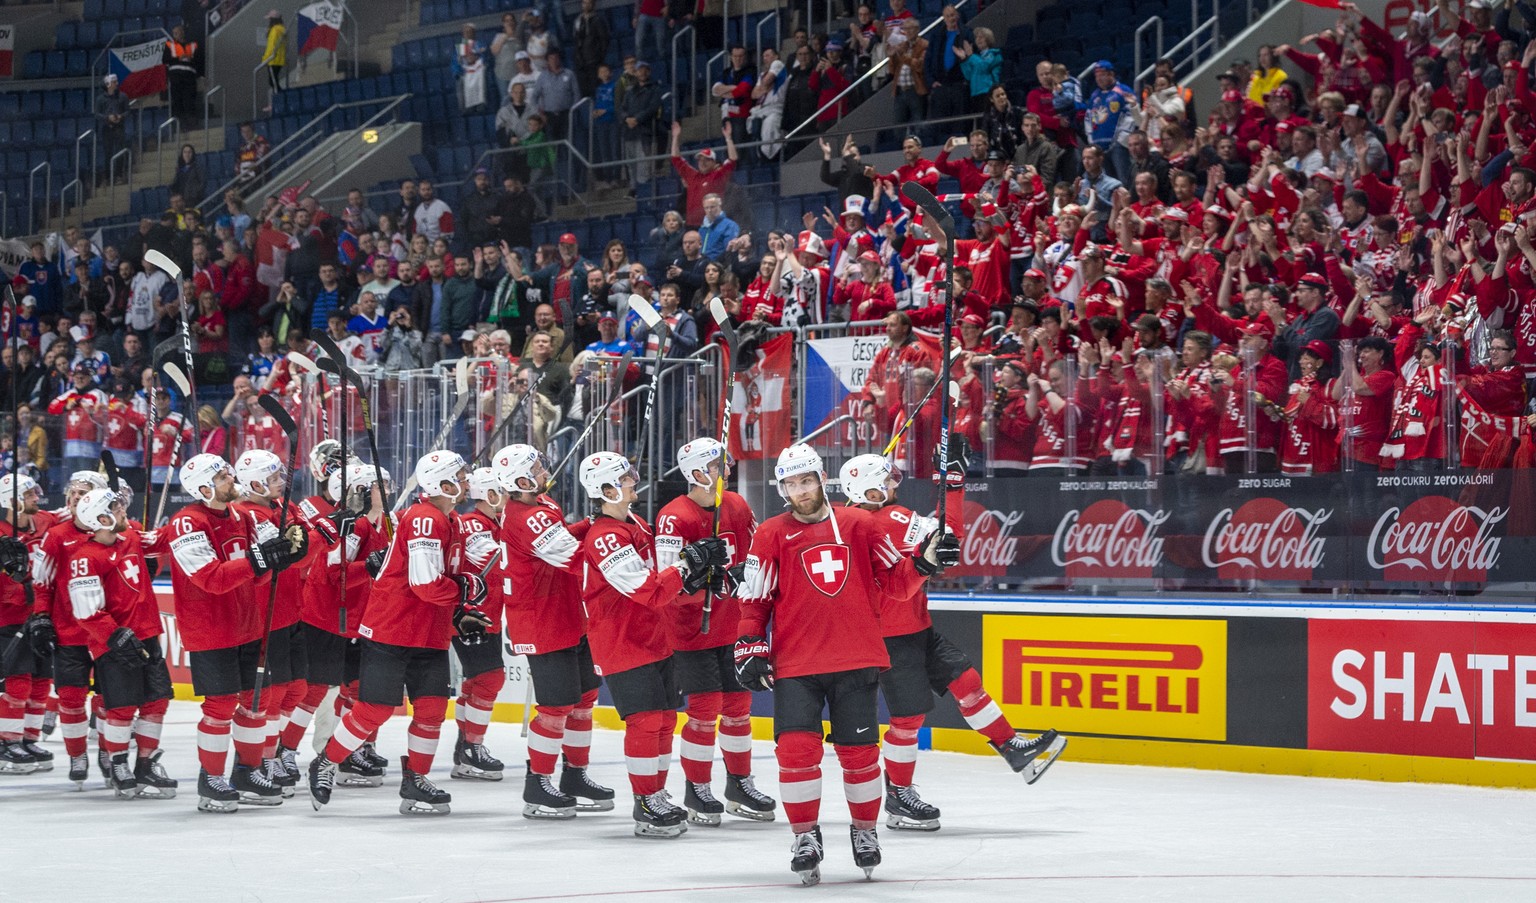 Switzerland&#039;s team and fans celebrater after winning 9:0 after the game between Switzerland and Italy, at the IIHF 2019 World Ice Hockey Championships, at the Ondrej Nepela Arena in Bratislava, S ...